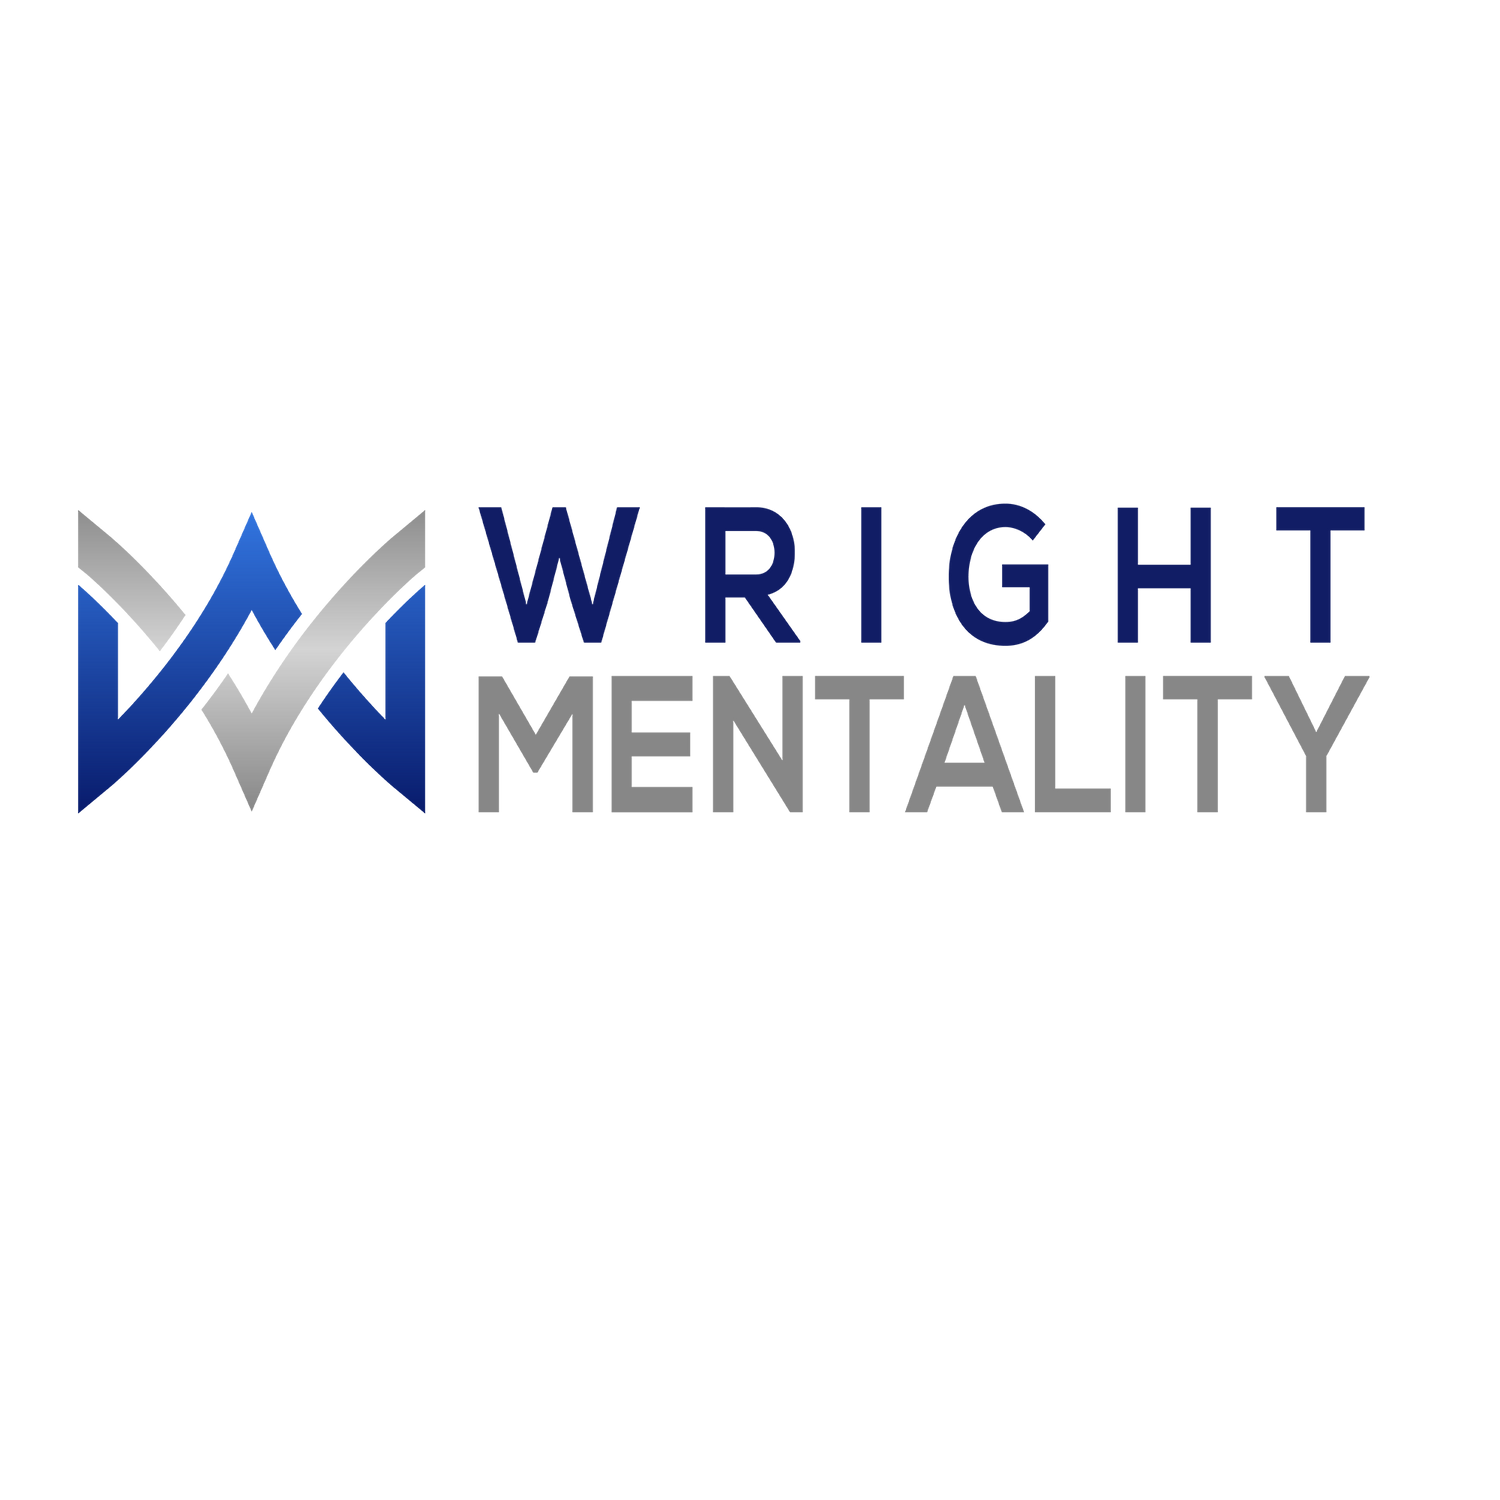 Marcus Wright The "Wright Mentality"